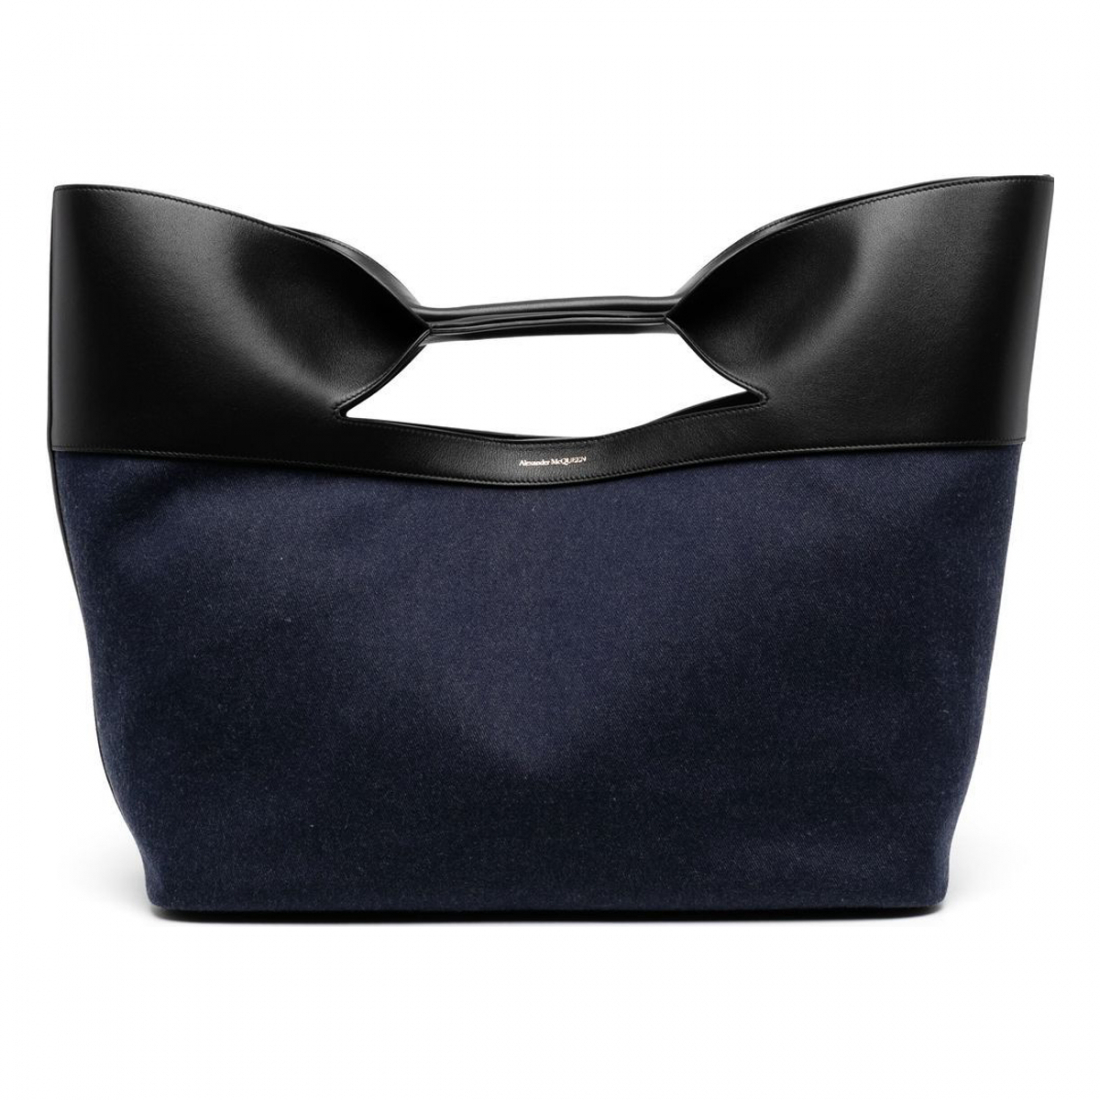 Women's 'The Bow Large' Top Handle Bag